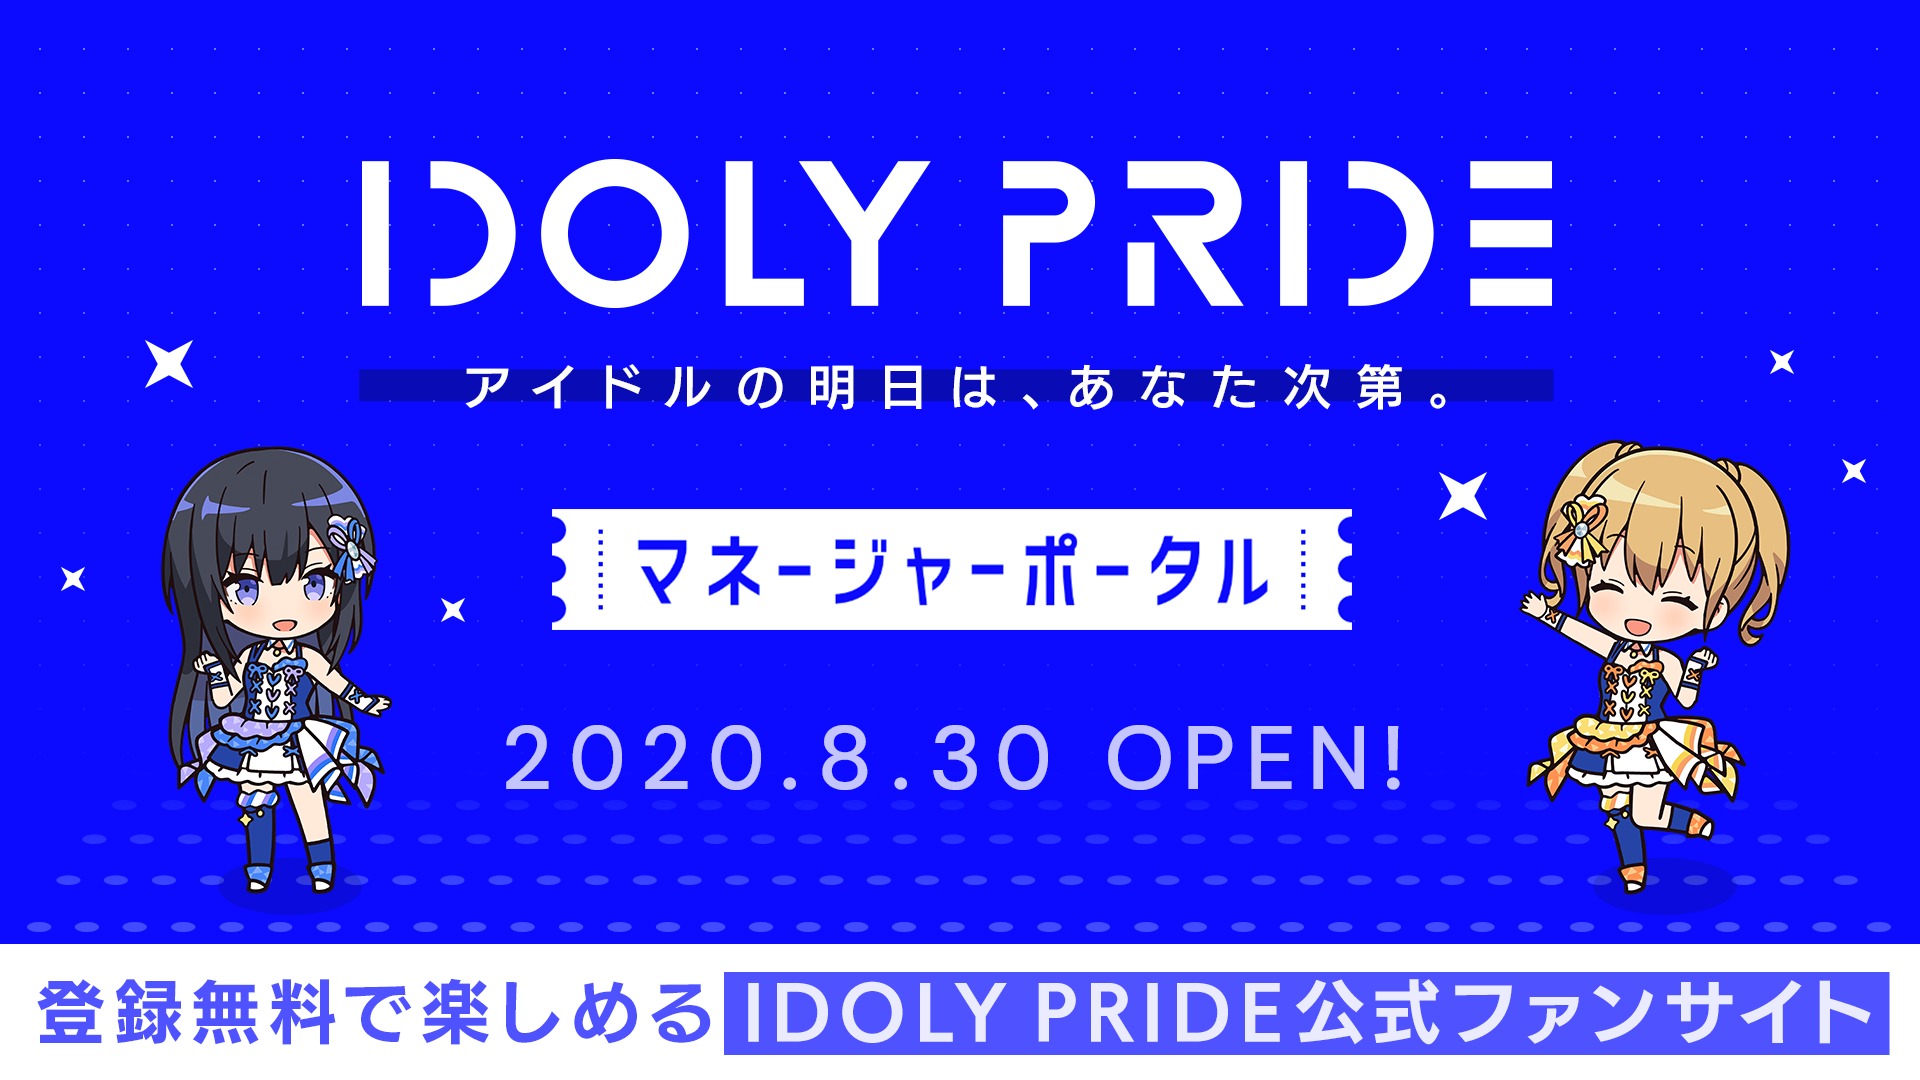 (C) 2019 Project IDOLY PRIDE